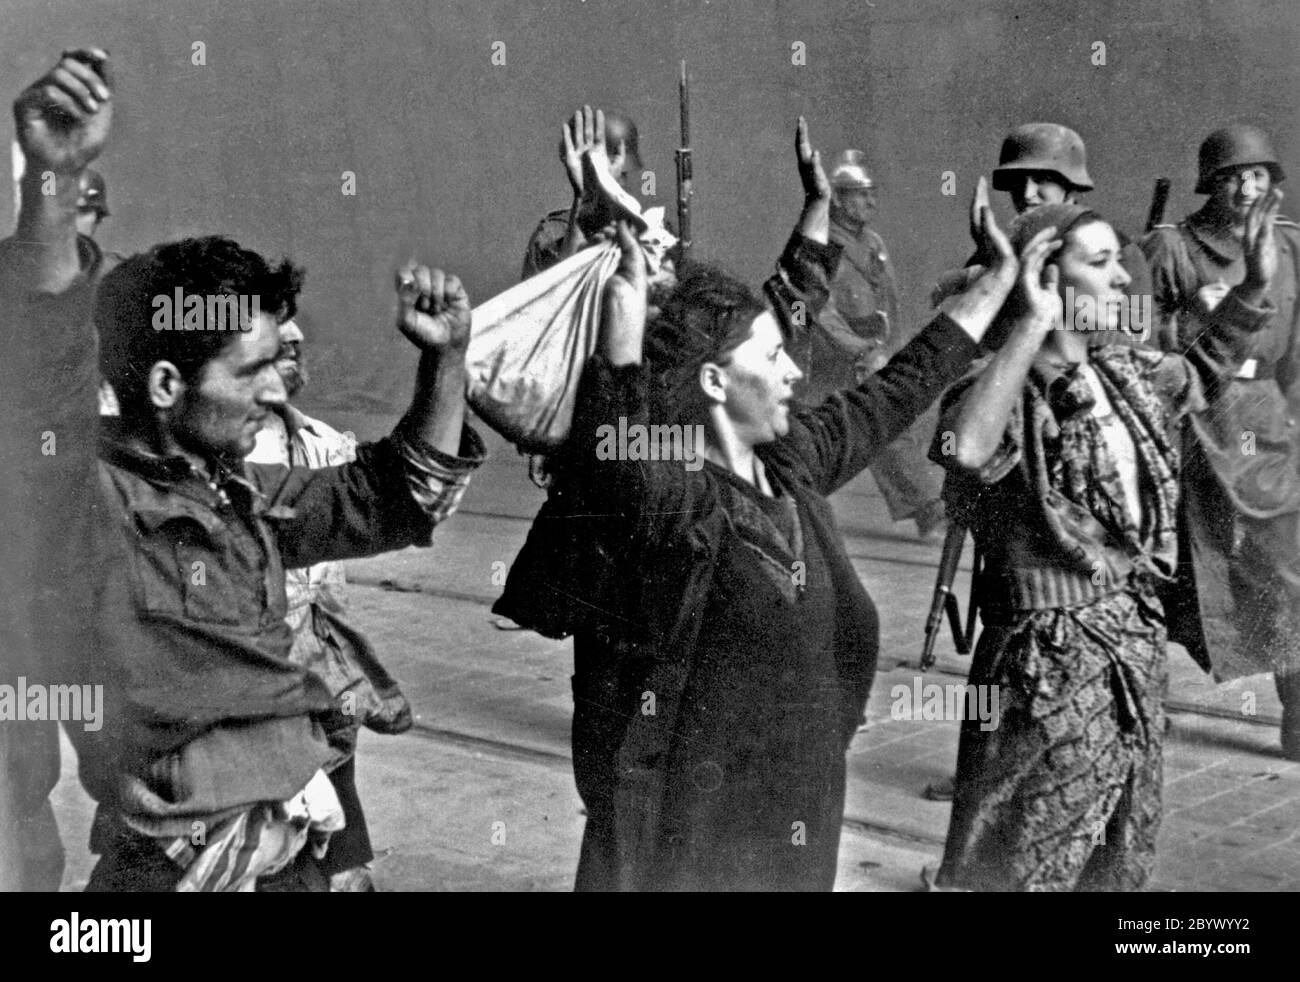 Stroop Report - Warsaw Ghetto Uprising,  Picture taken at Nowolipie street looking East, near intersection with Smocza street, Woman on the right: Hasia Szylgold-Szpiro ca. 1943 Stock Photo